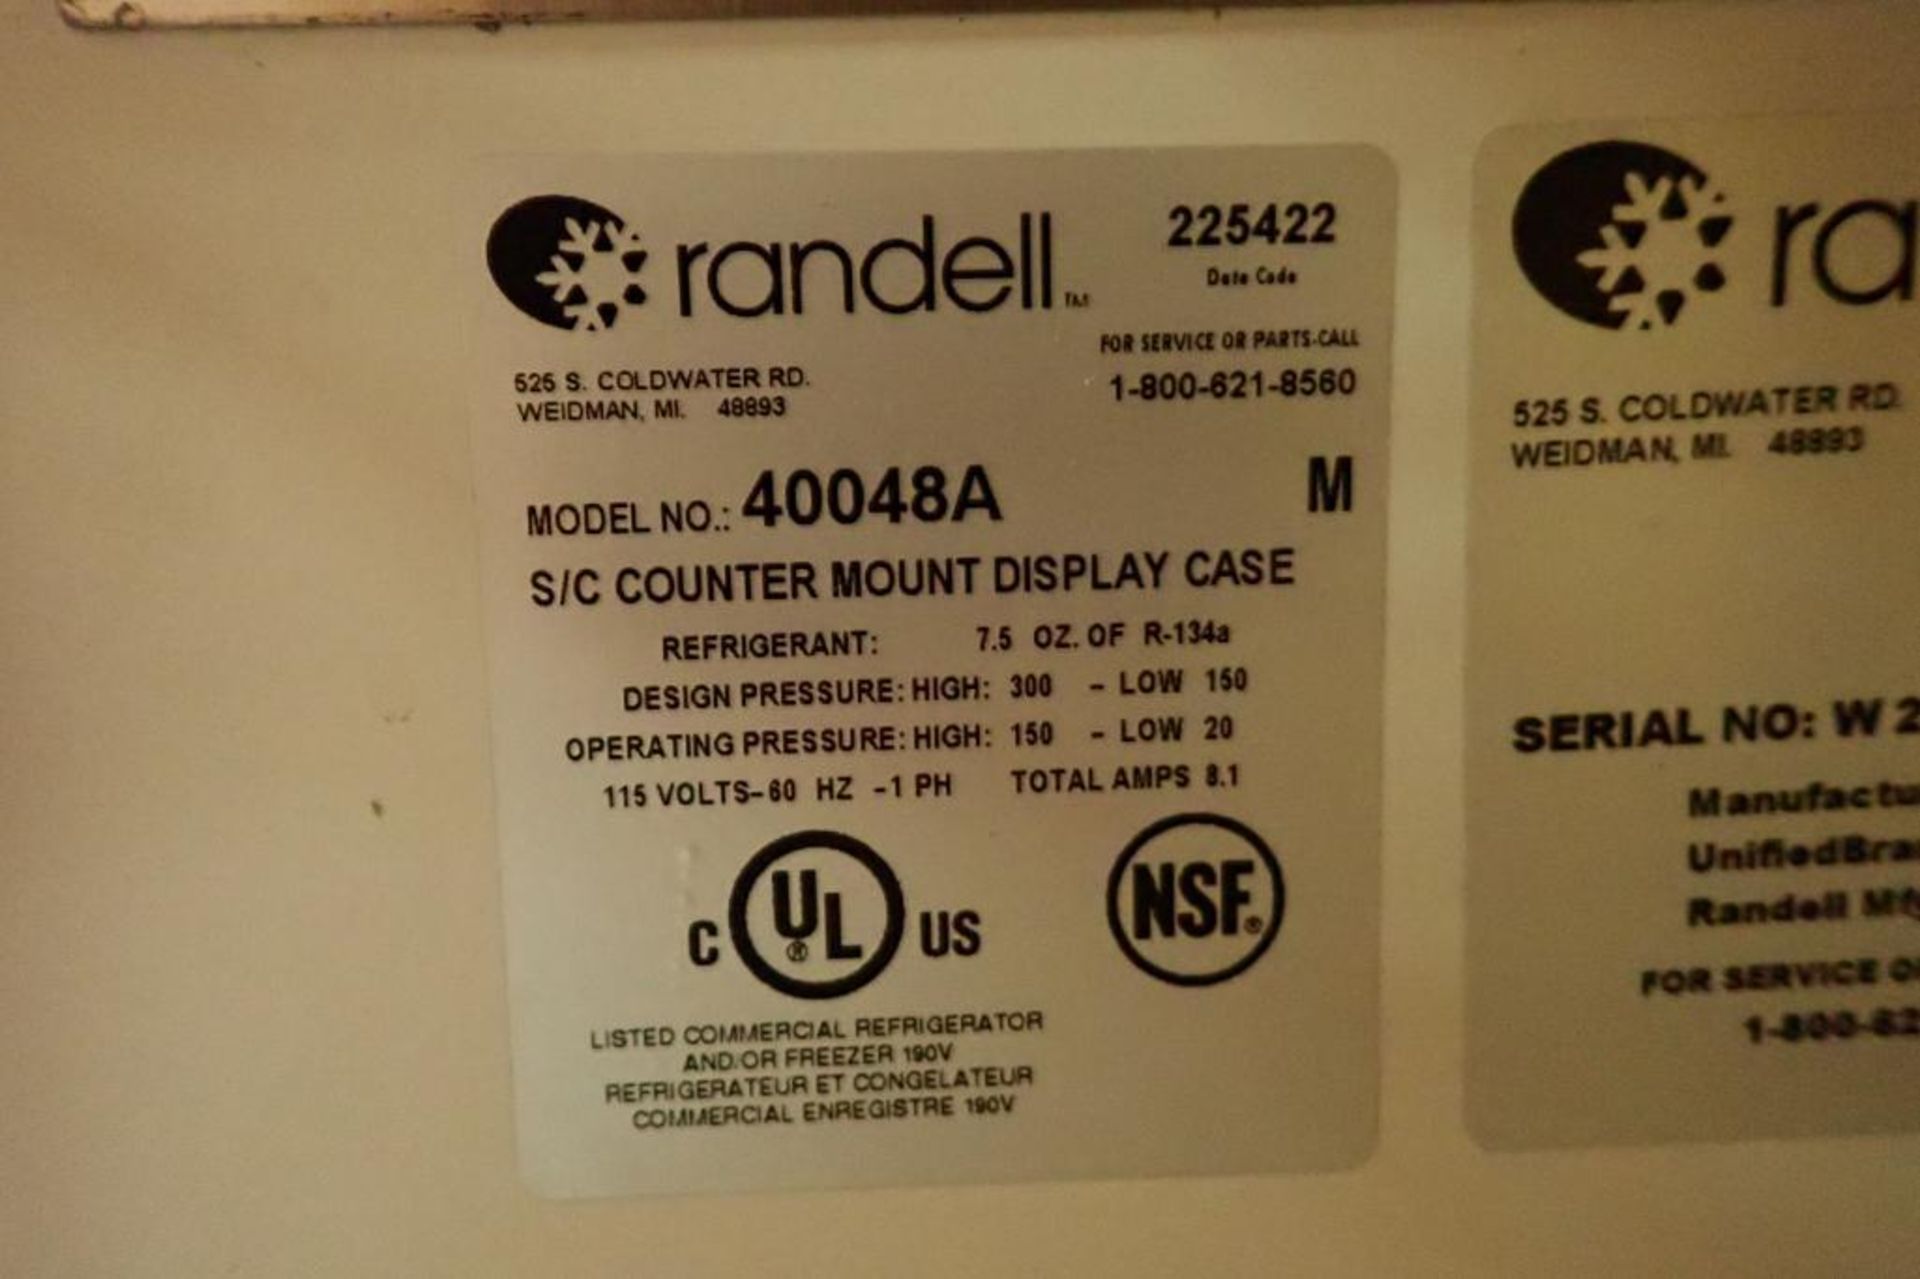 Randell refrigerated s/c counter mount display case - Image 5 of 7